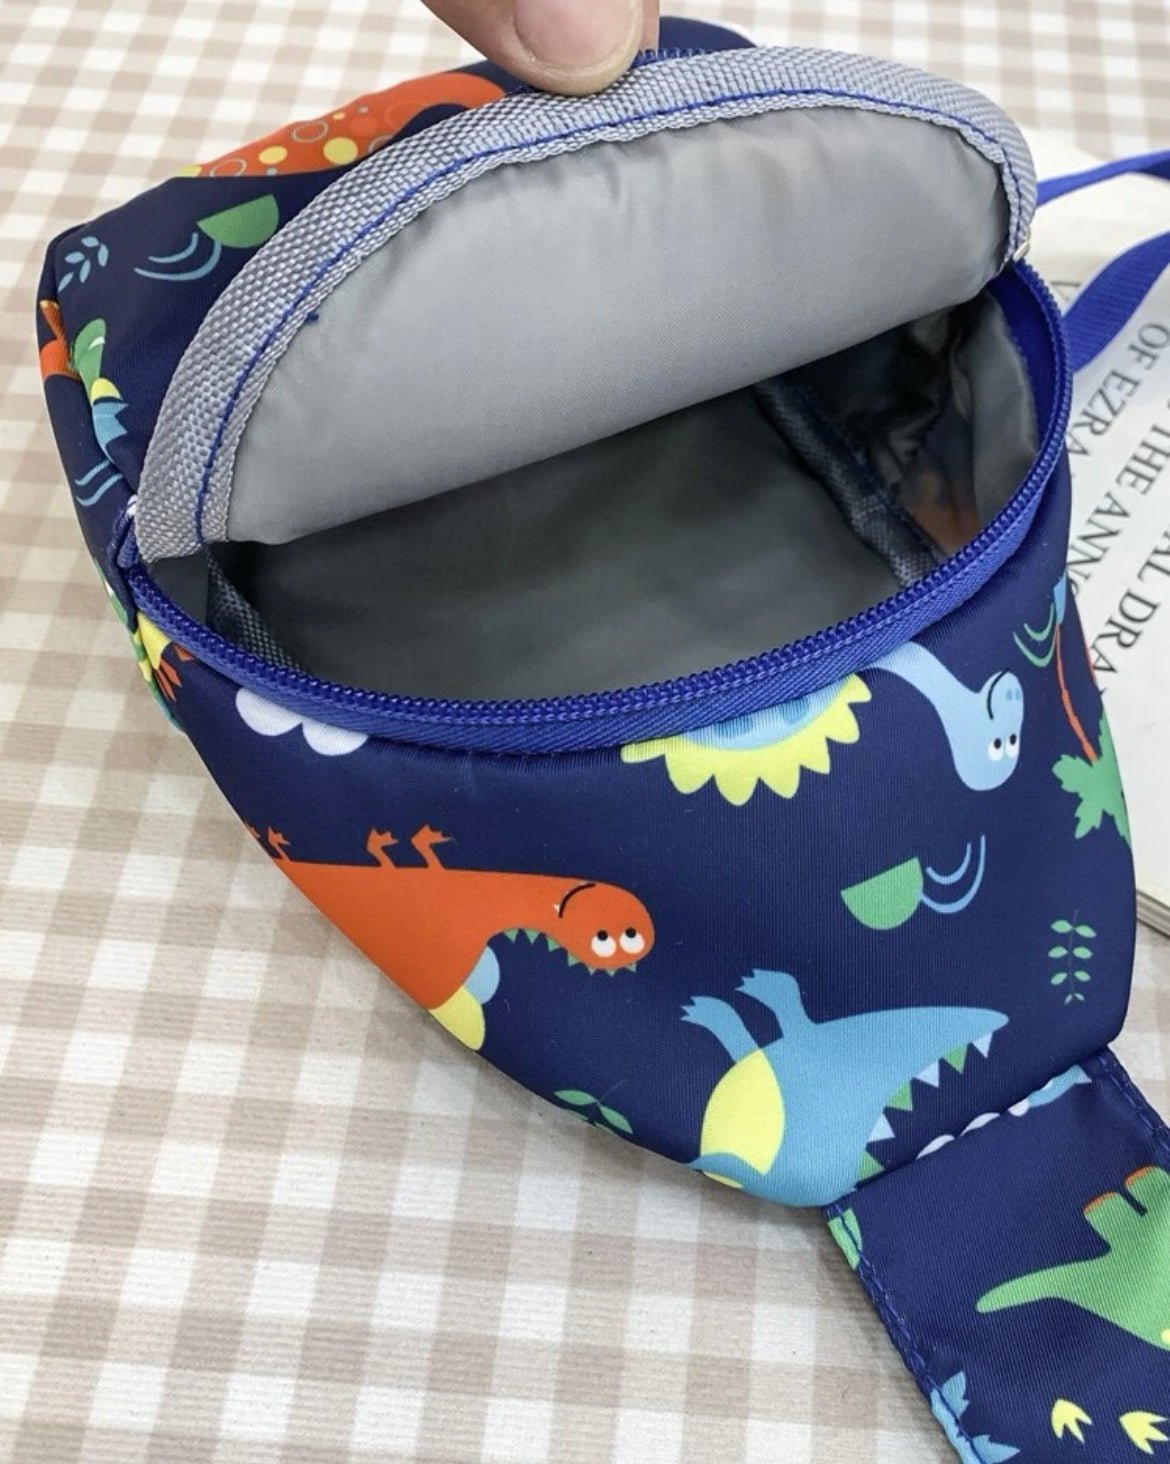 Kids Mini Sling Bag - A World With You Travel